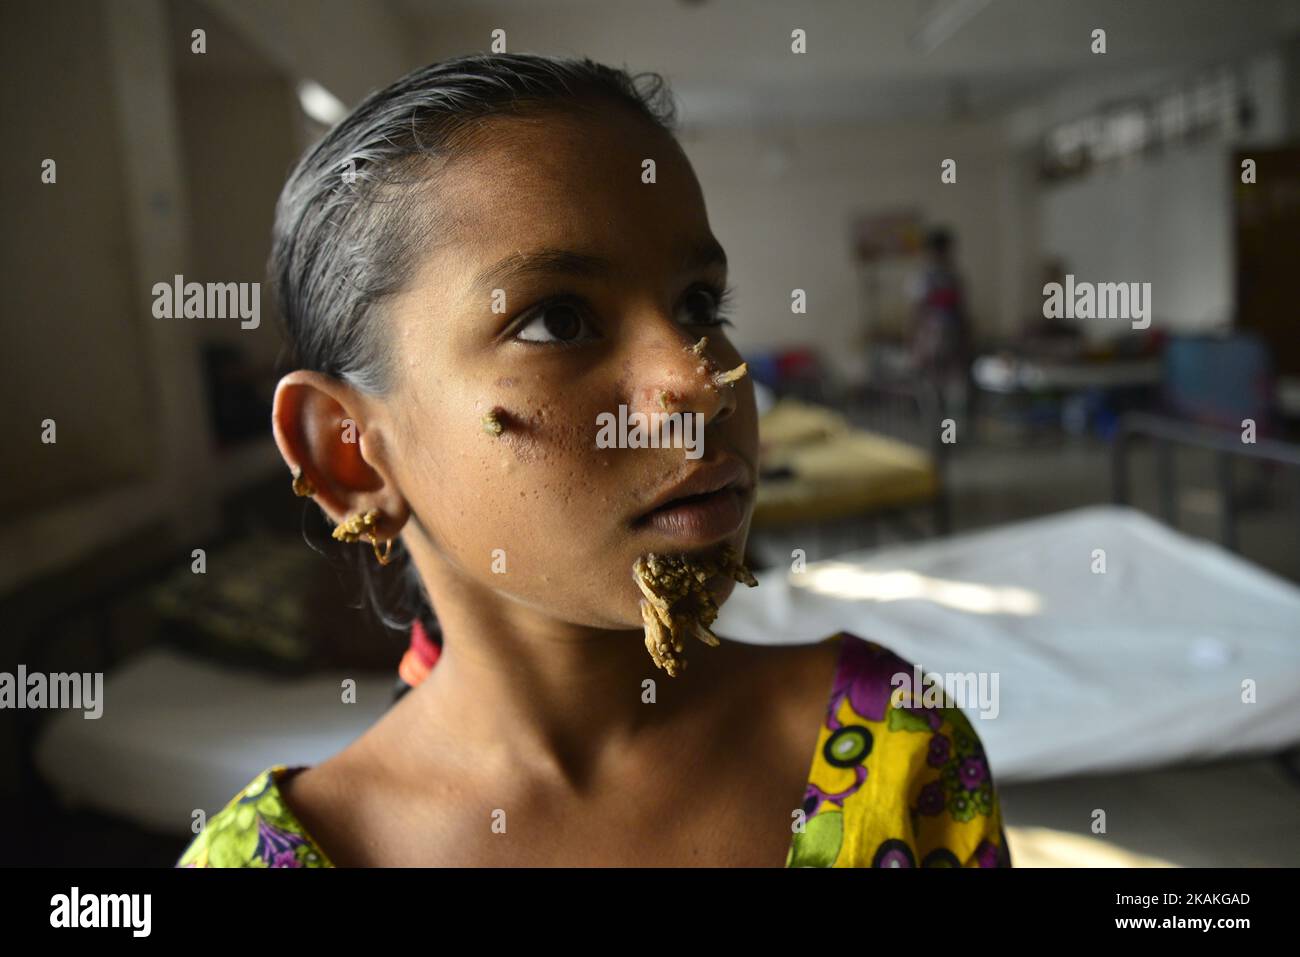 In this photograph taken on January 30, 2017, Bangladeshi patient Sahana Khatun, 10, poses for a photograph at the Dhaka Medical College and Hospital. A young Bangladeshi girl with bark-like warts growing on her face could be the first female ever afflicted by so-called "tree man syndrome", doctors studying the rare condition said January 31. Ten-year-old Sahana Khatun has the tell-tale gnarled growths sprouting from her chin, ear and nose, but doctors at Dhaka's Medical College Hospital are still conducting tests to establish if she has the unusual skin disorder. (Photo by Mamunur Rashid/NurP Stock Photo